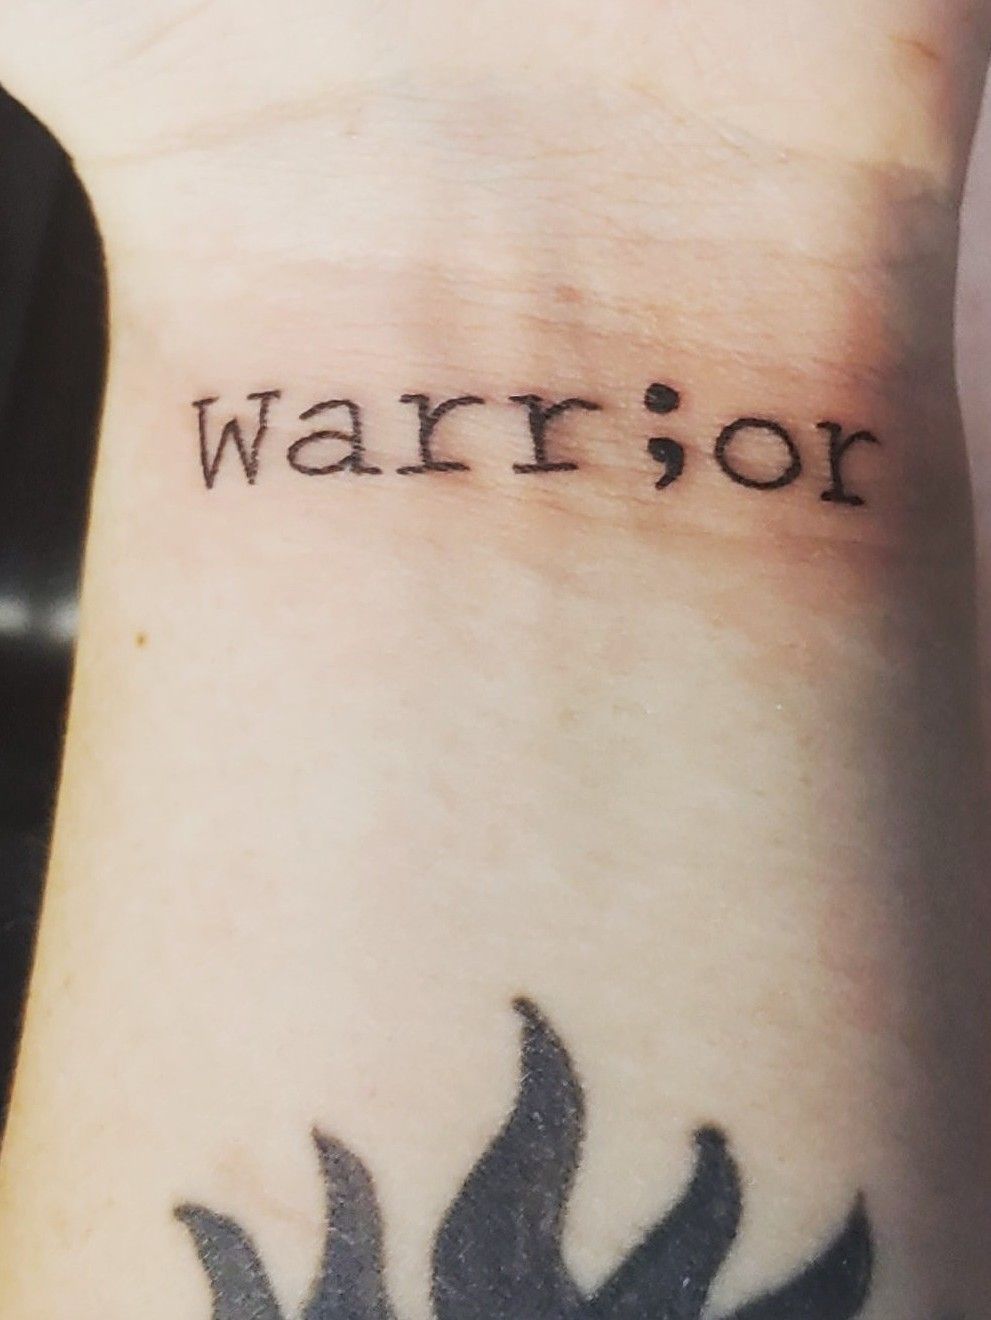 Warrior Tattoo with Spiritual Meaning